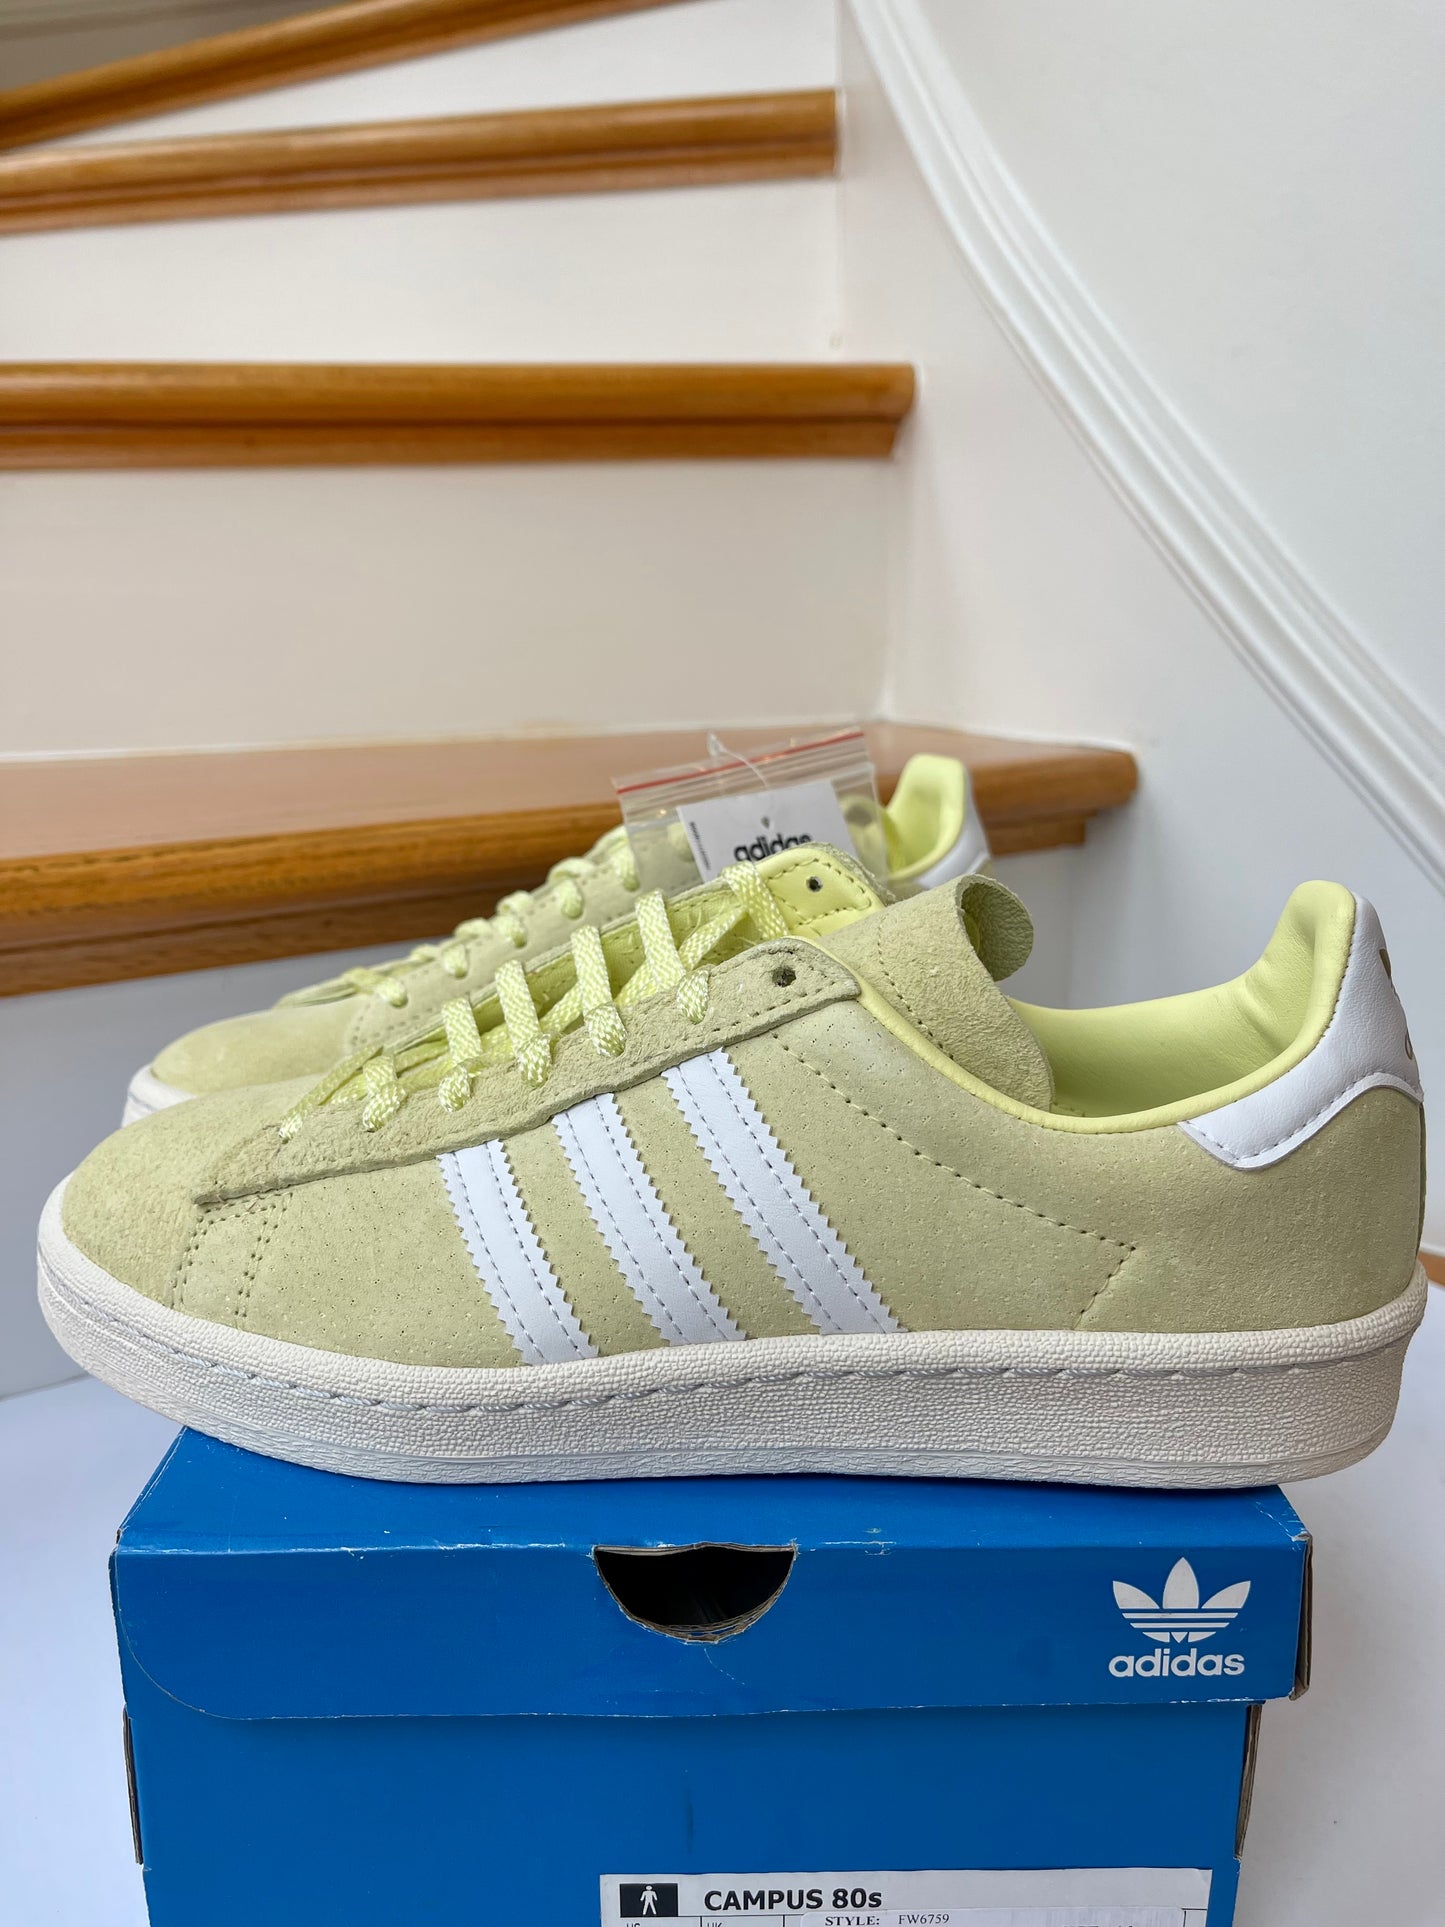 Adidas Campus 80s Light yellow green Sneakers